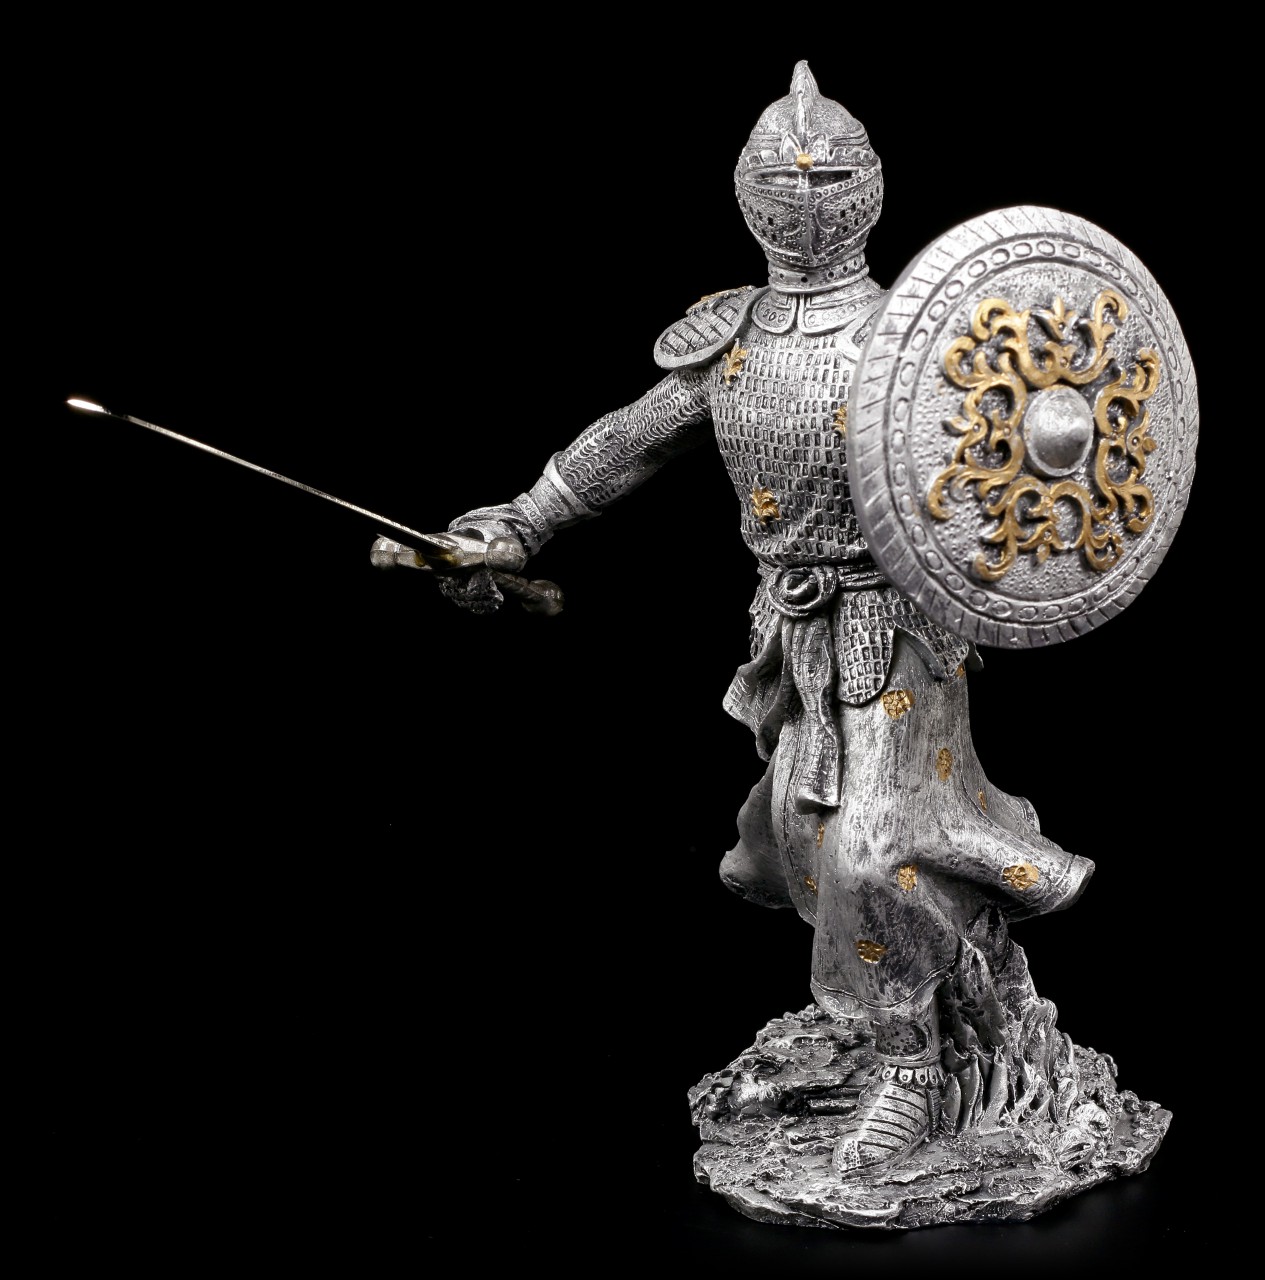 Knight Figurine with Sword and Shield to Attack